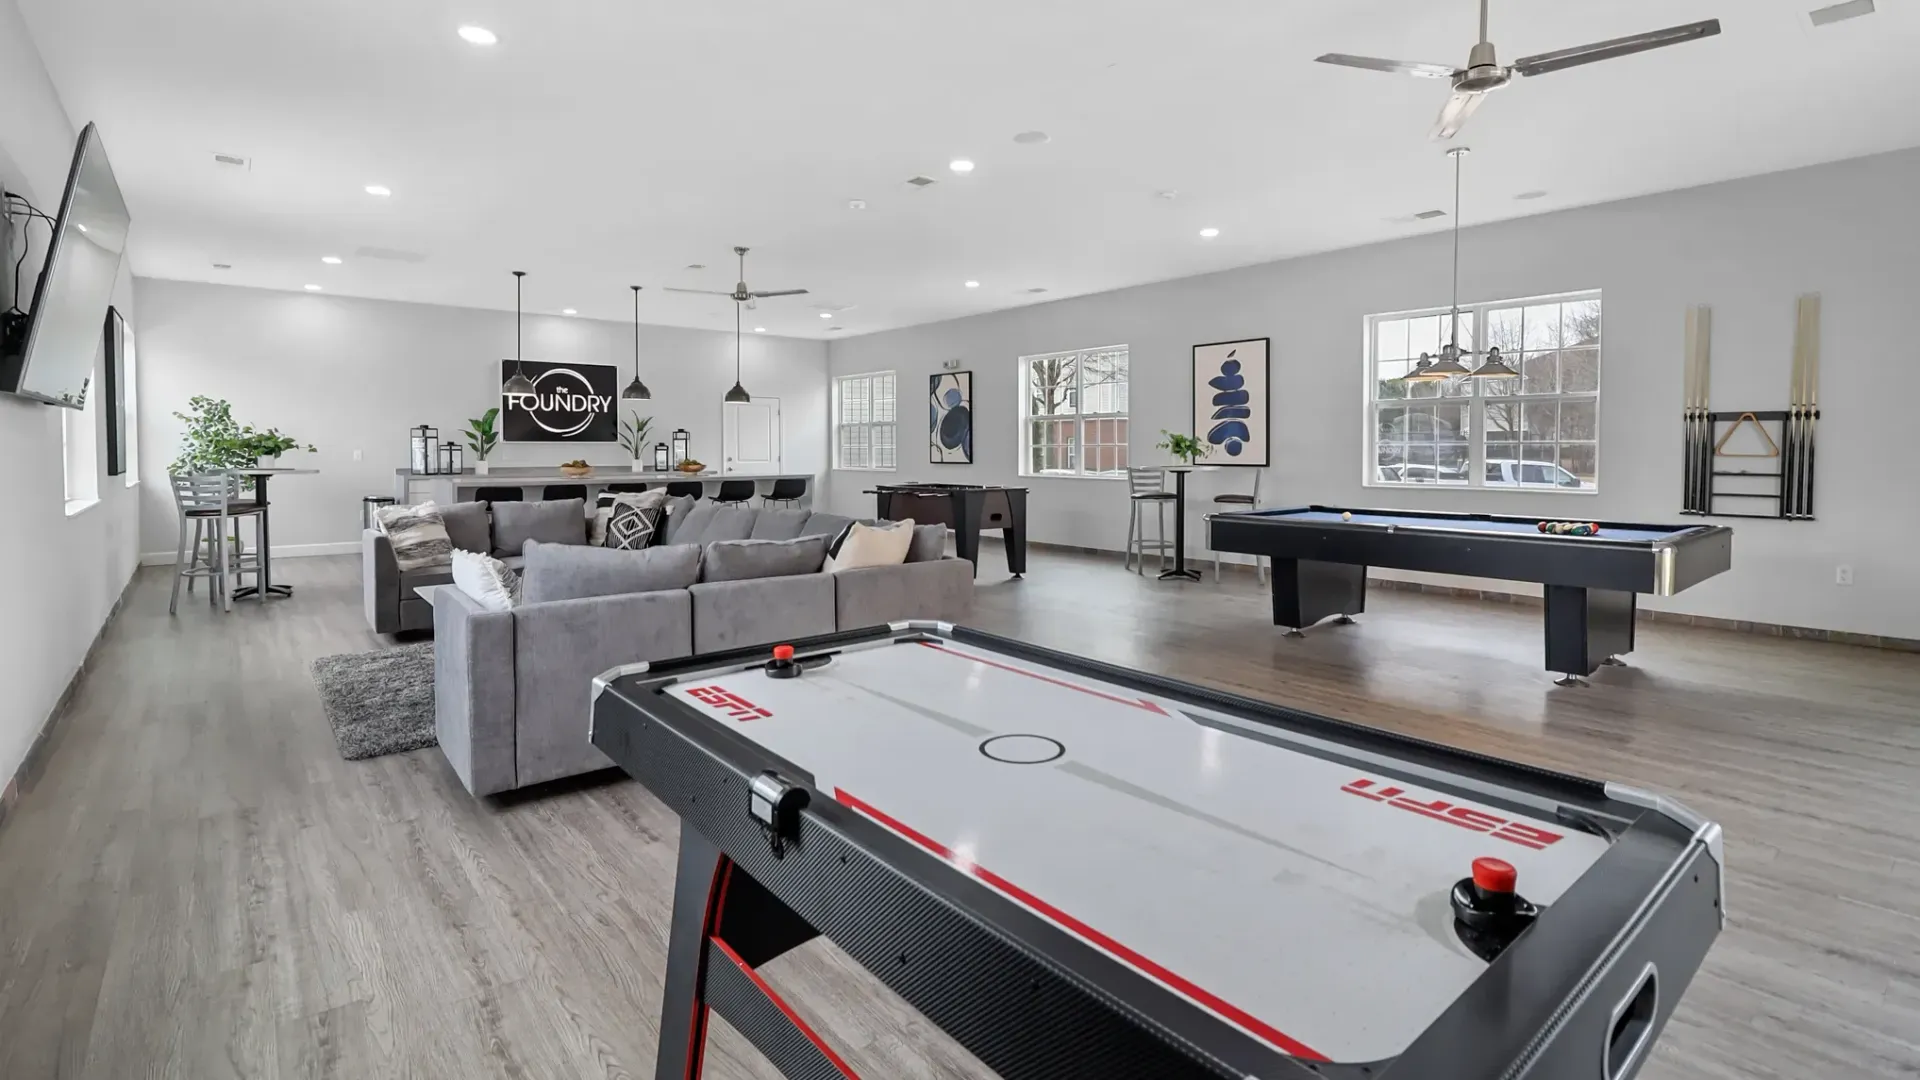 An air hockey table and billiard table poised for play along with a massive sectional couch